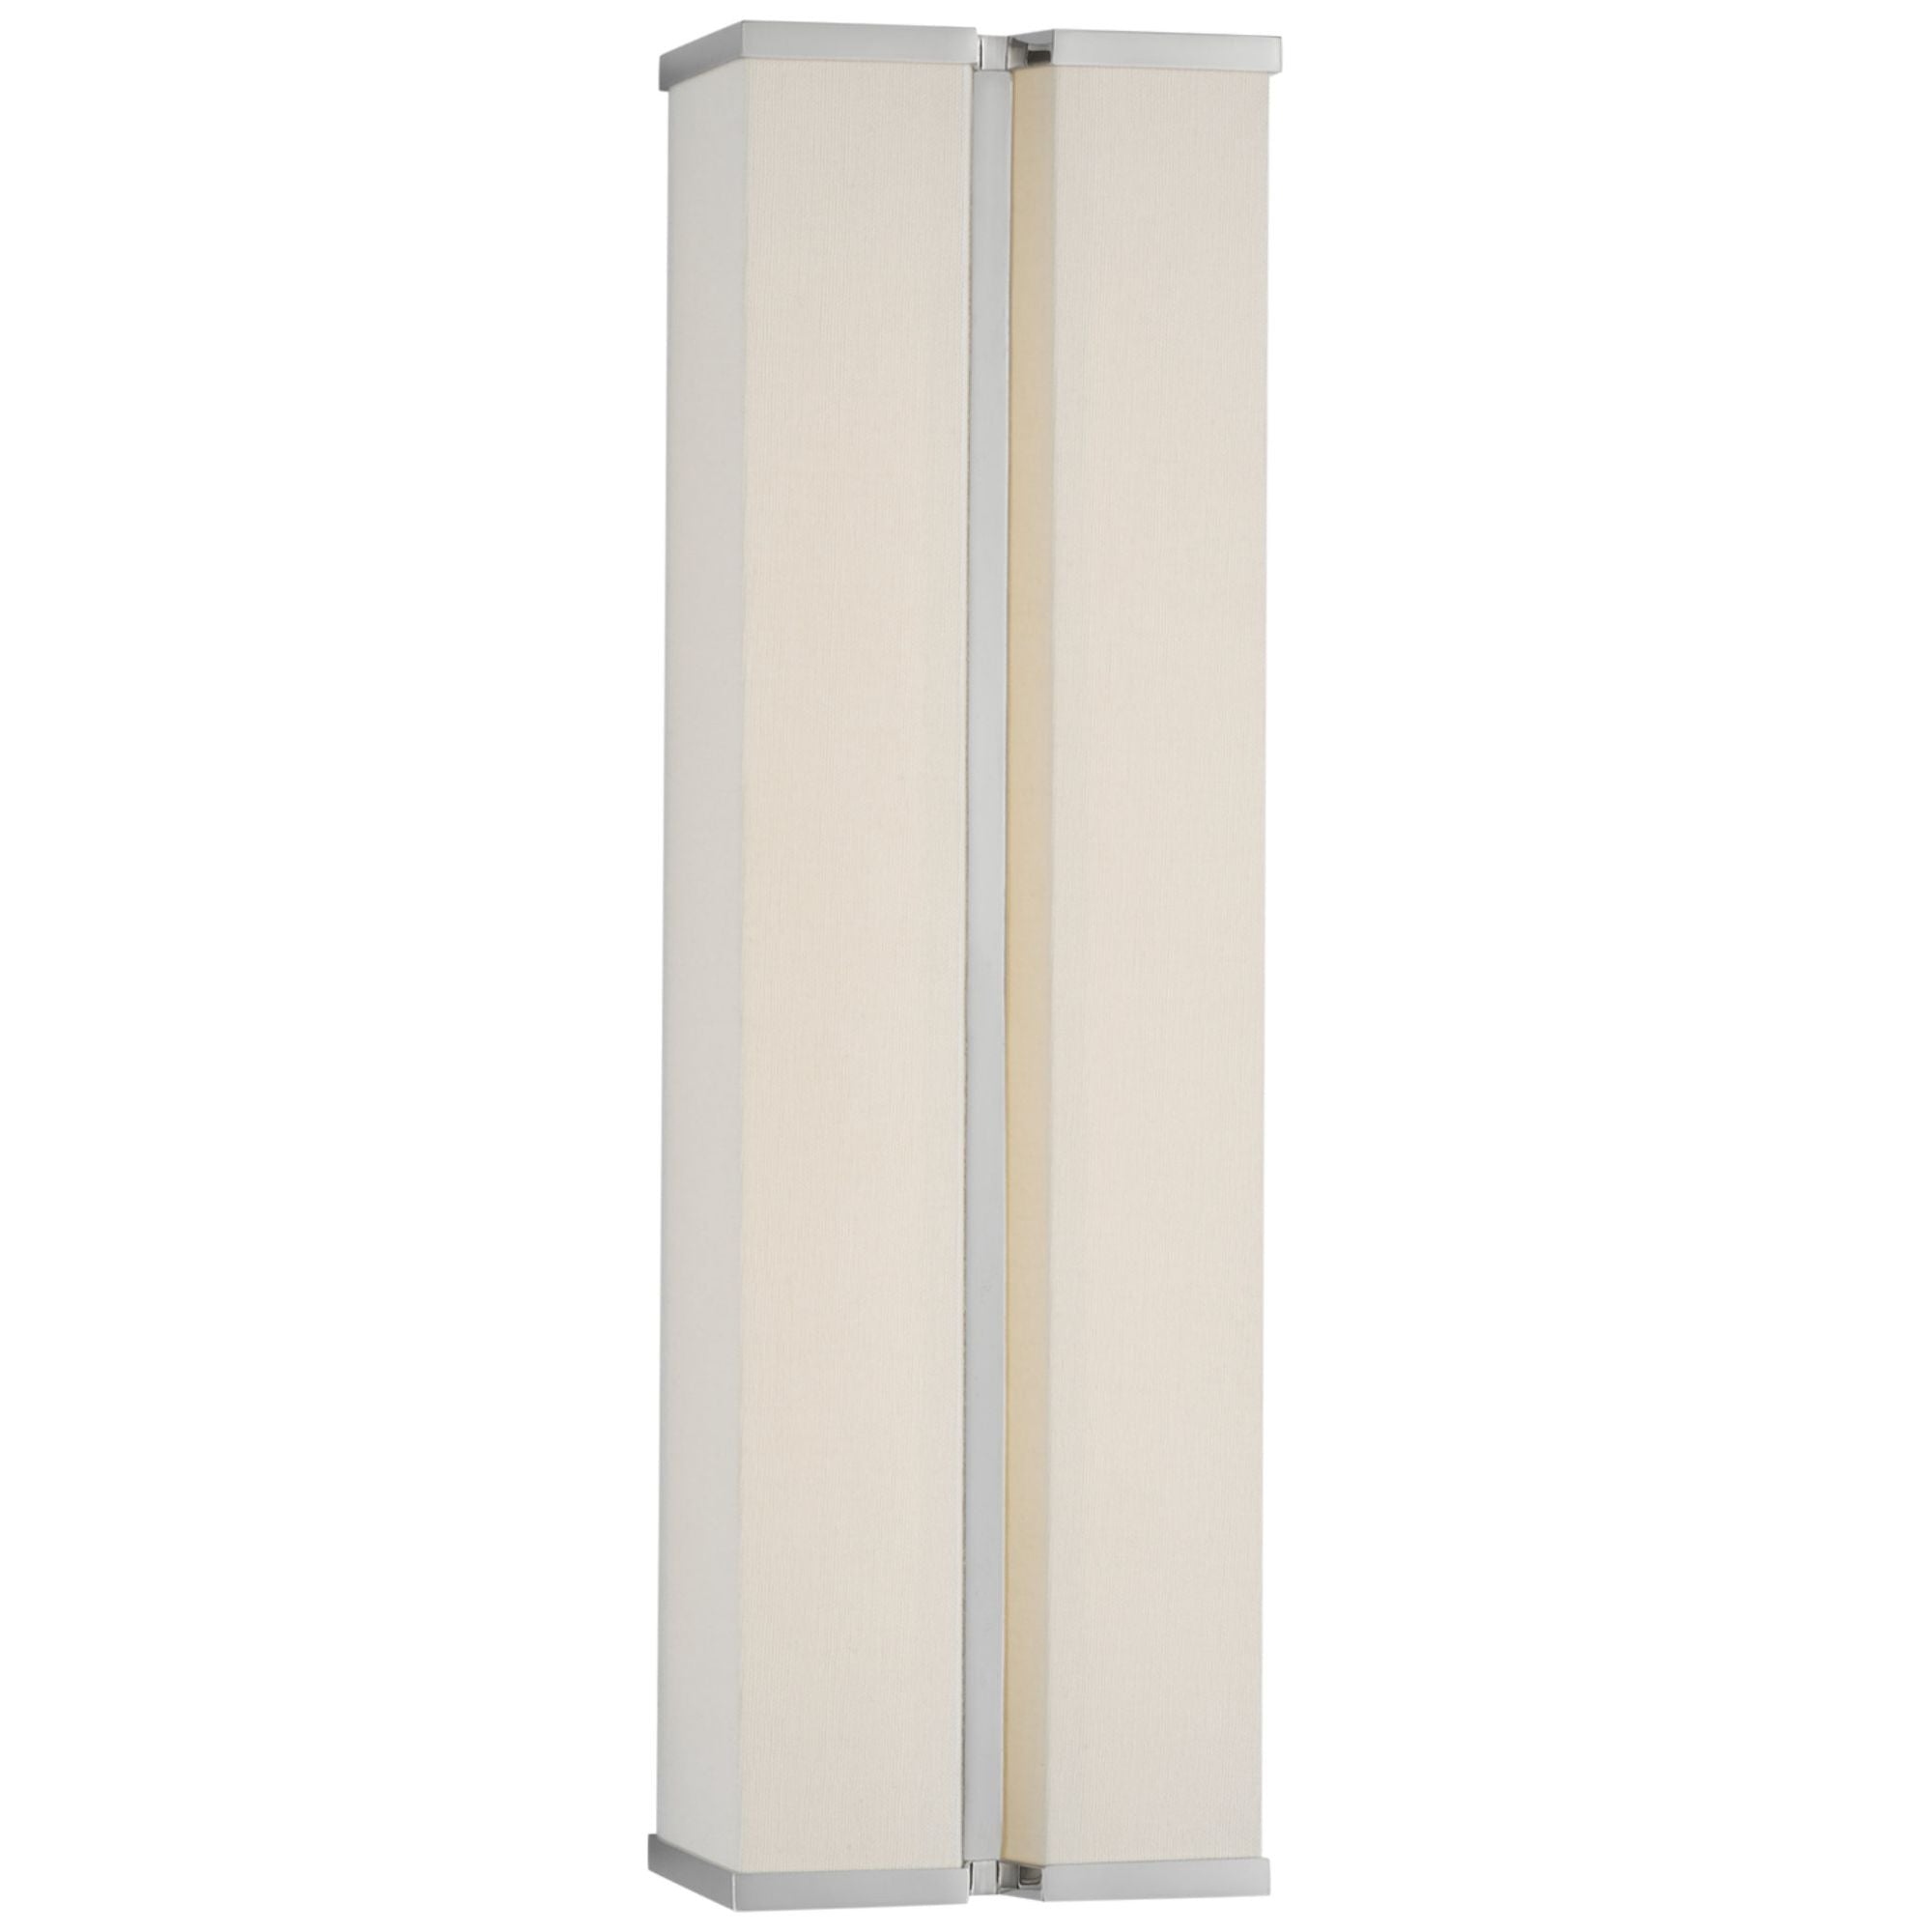 Paloma Contreras Vernet 18" Sconce in Polished Nickel and Linen